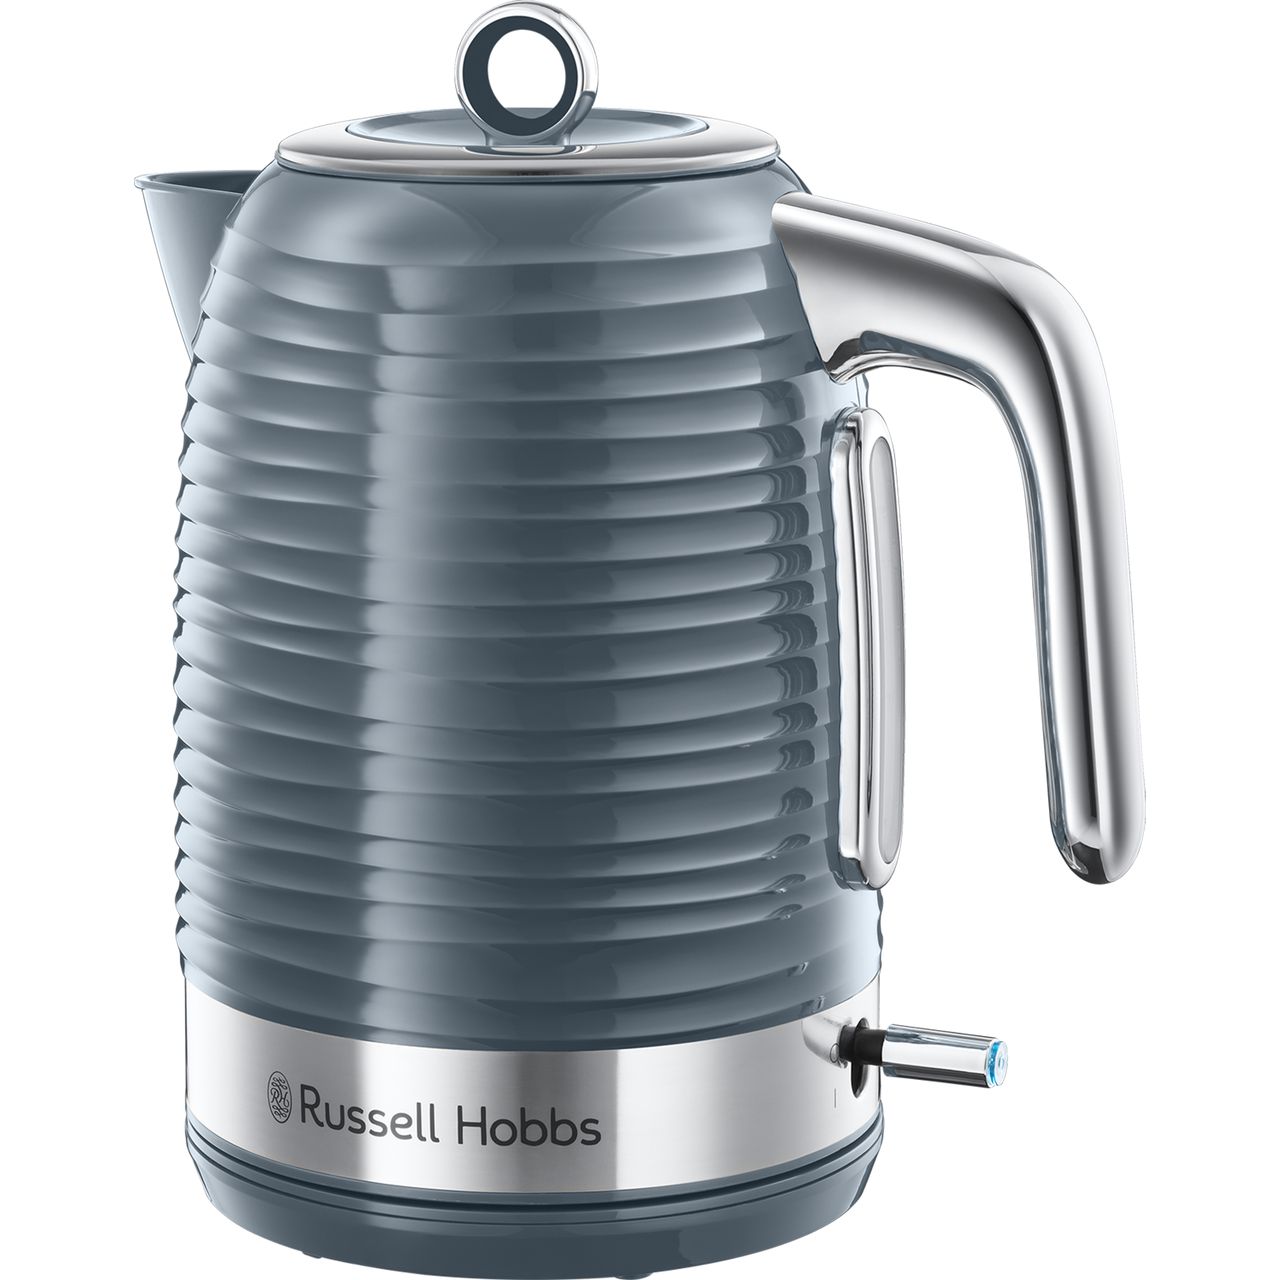 Russell Hobbs Inspire 24363 Kettle Review